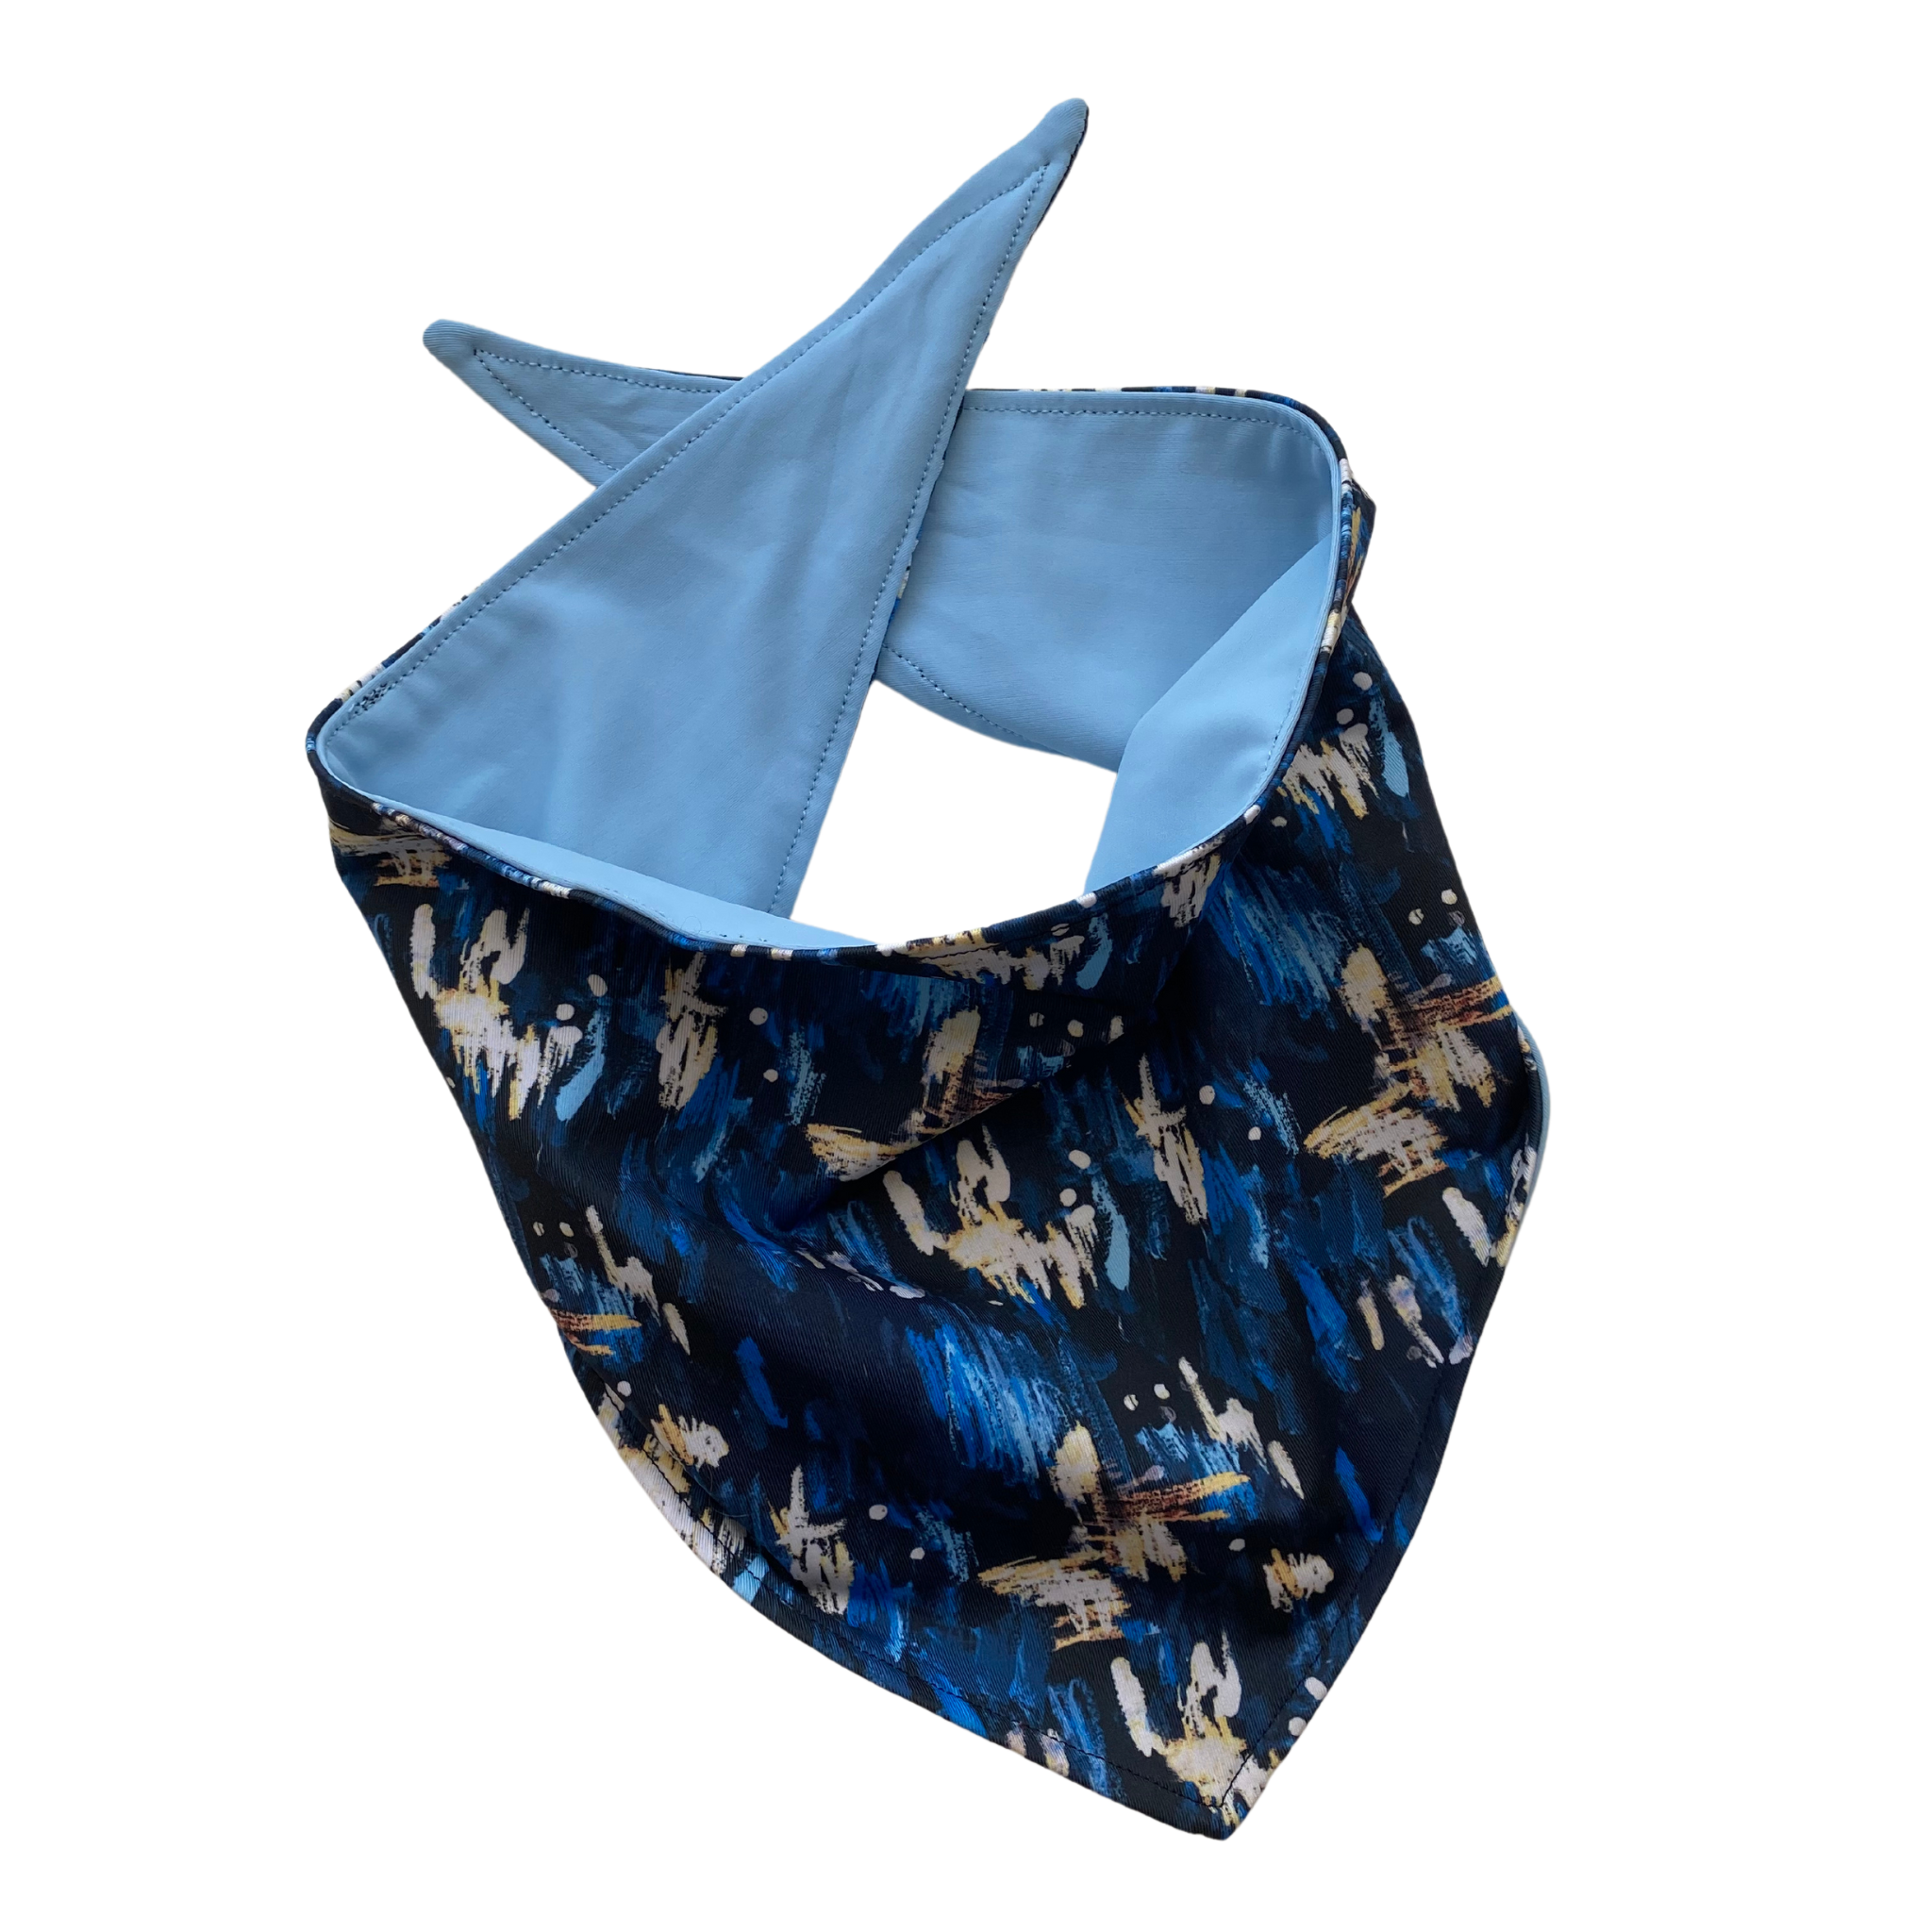 Close up picture of reversible dog swim scARF, aka cooling bandana for dogs. Showcasing a light blue color on one side and an abstract navy blue print on the other side. Pipevine Designs.